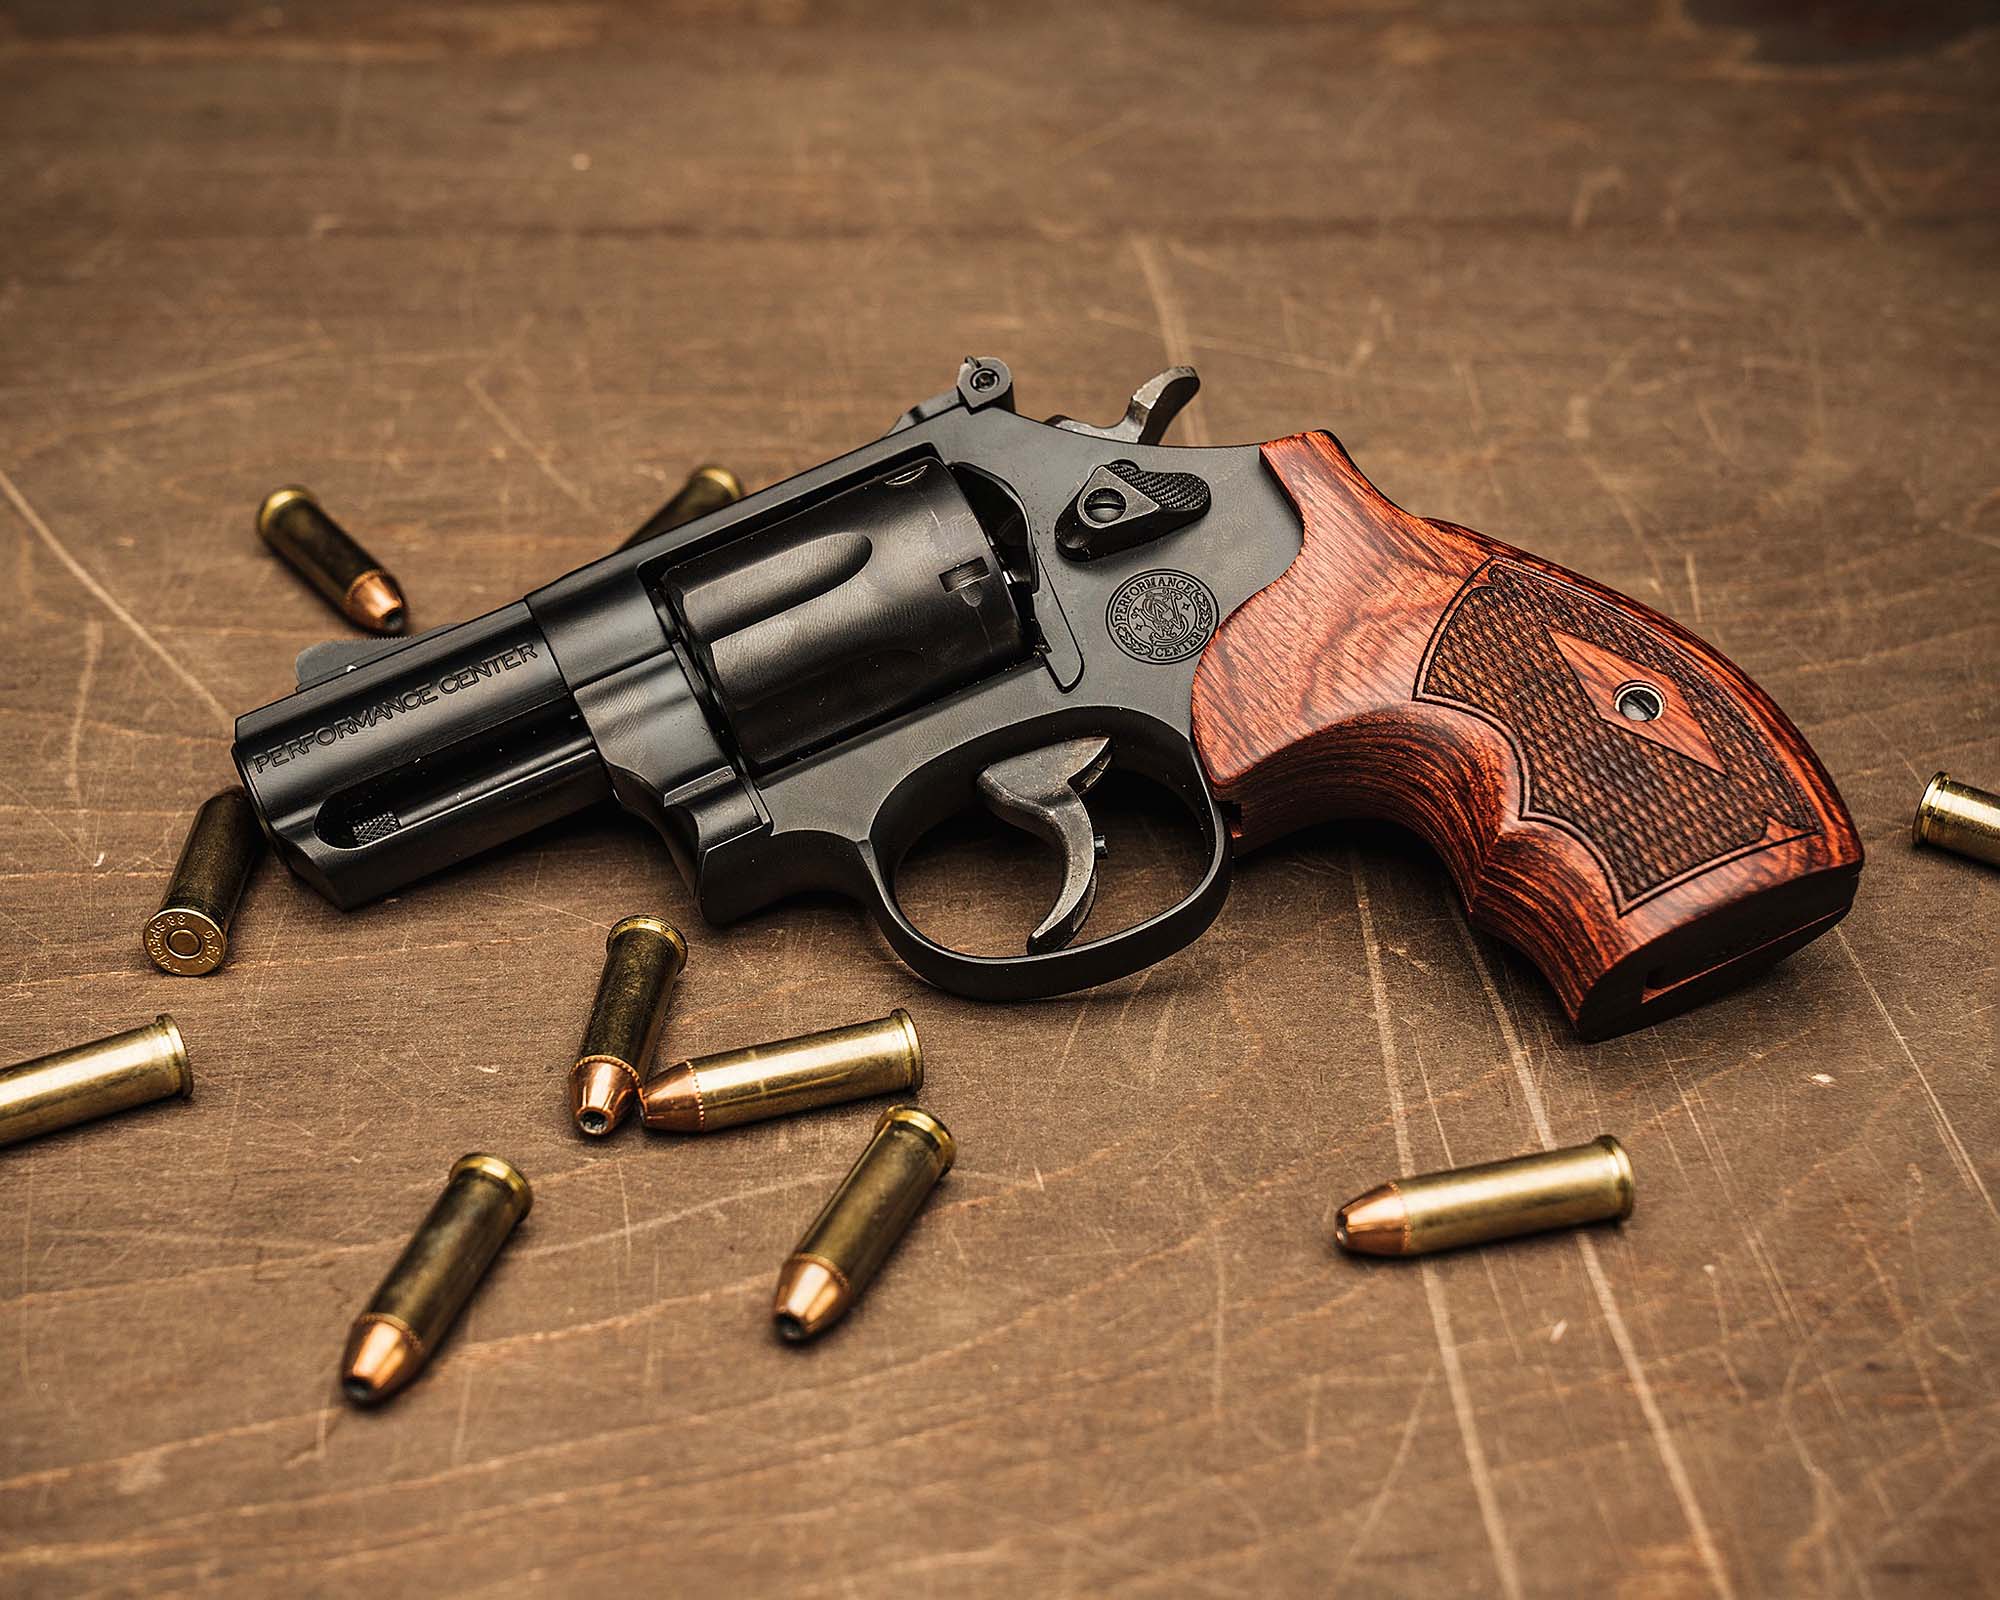 smith and wesson 357 magnum revolver